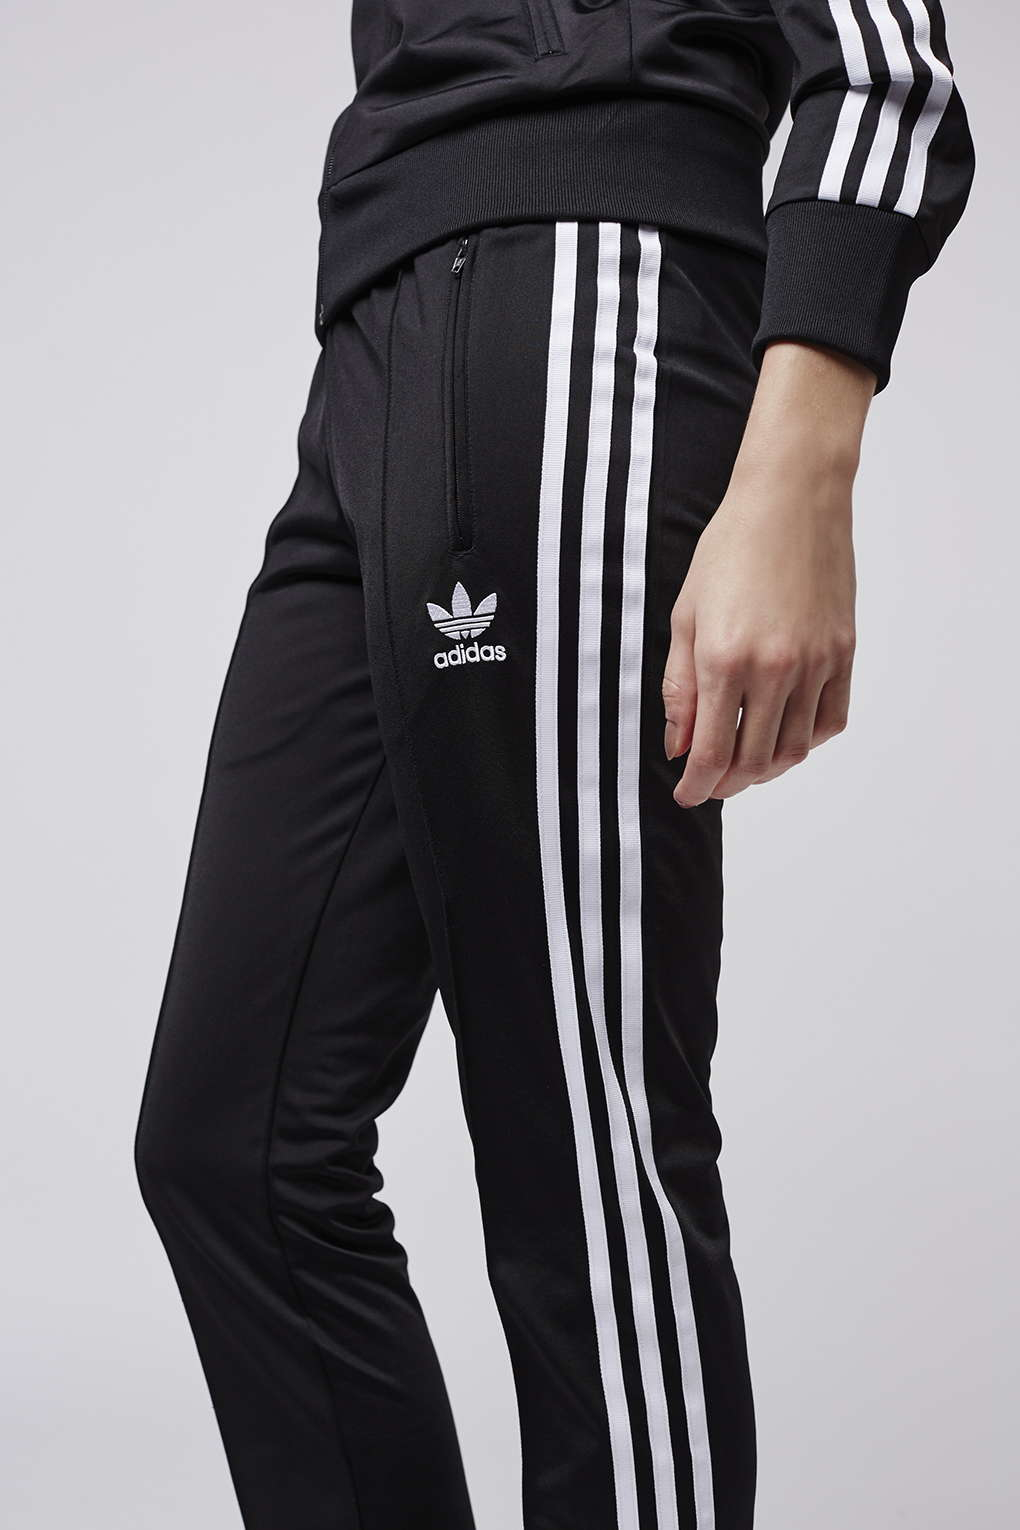 Topshop Black Firebird Track Pant Trousers By Adidas Originals Product 3 209465239 Normal 